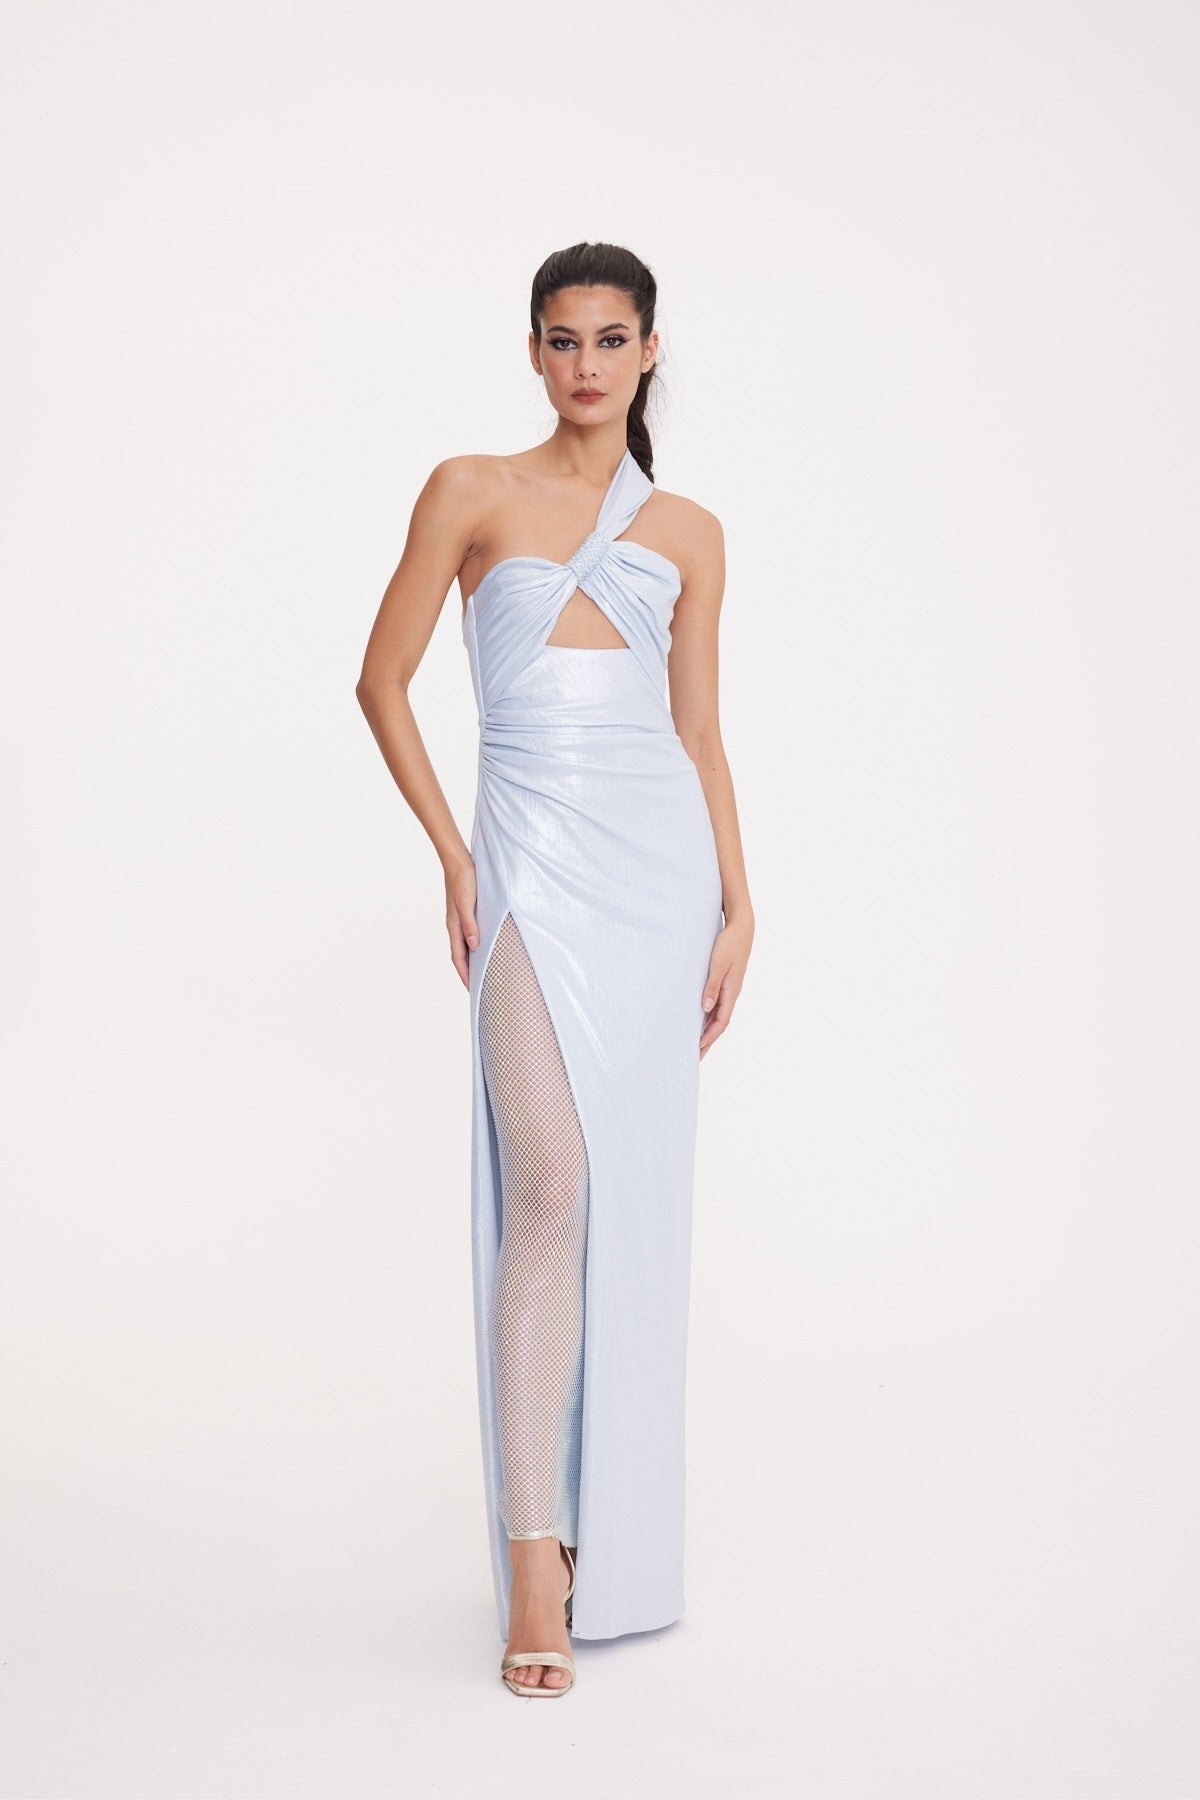 Long Evening Dress with One Cross Straps and Stones Fishnet Slit